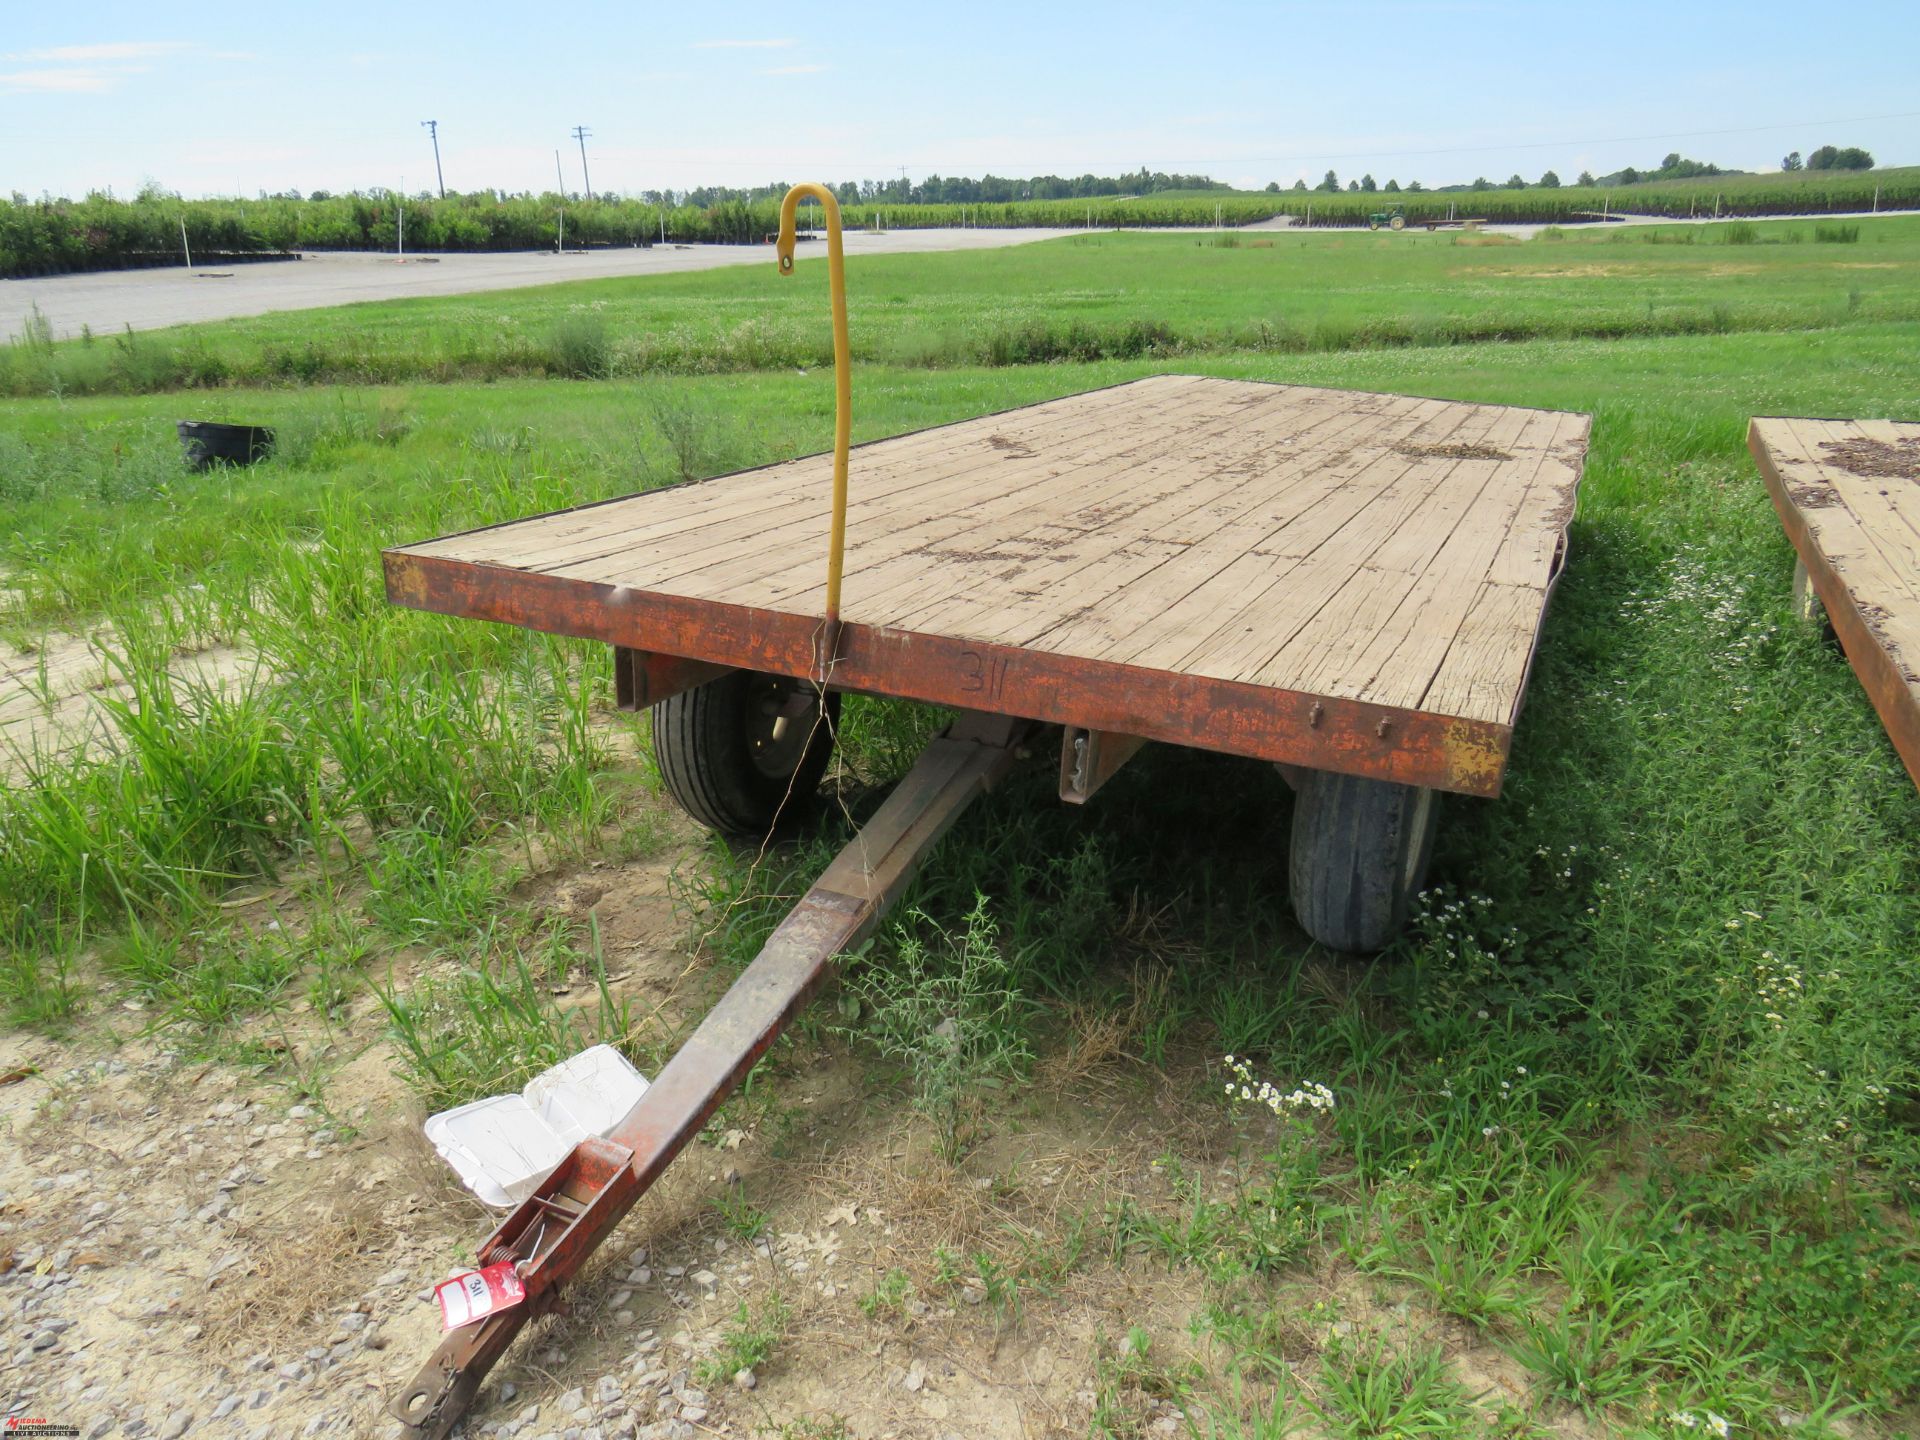 KORY 6072 FLAT BED WAGON, 20', TIE ROD STEERING, PIN HITCH, HAS FLAT TIRE